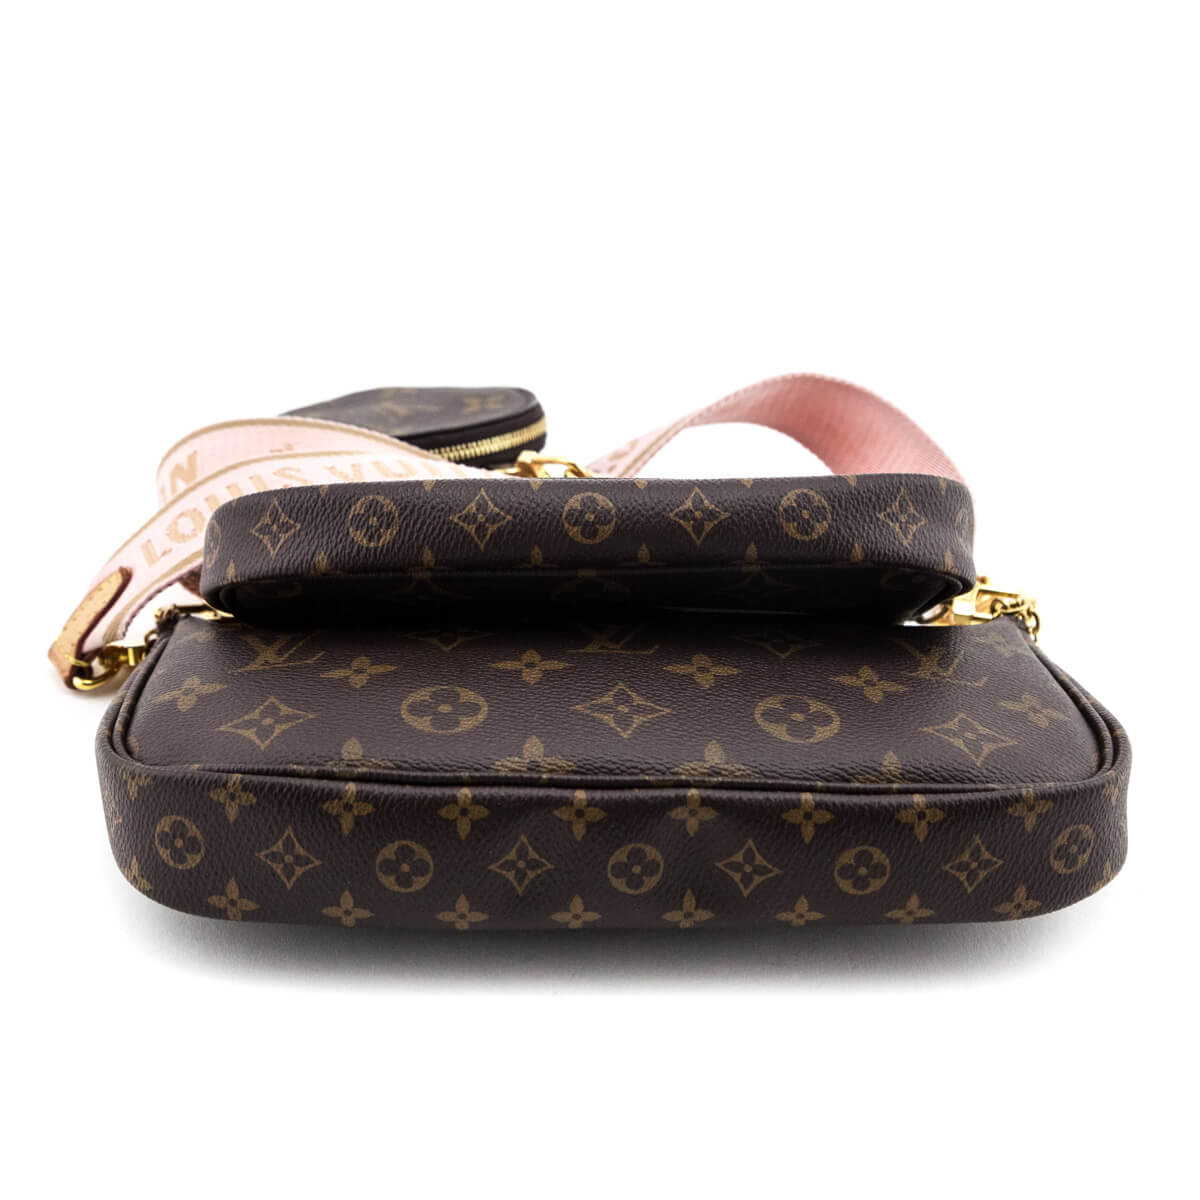 Louis Vuitton large pochette from multipochette Sd4270